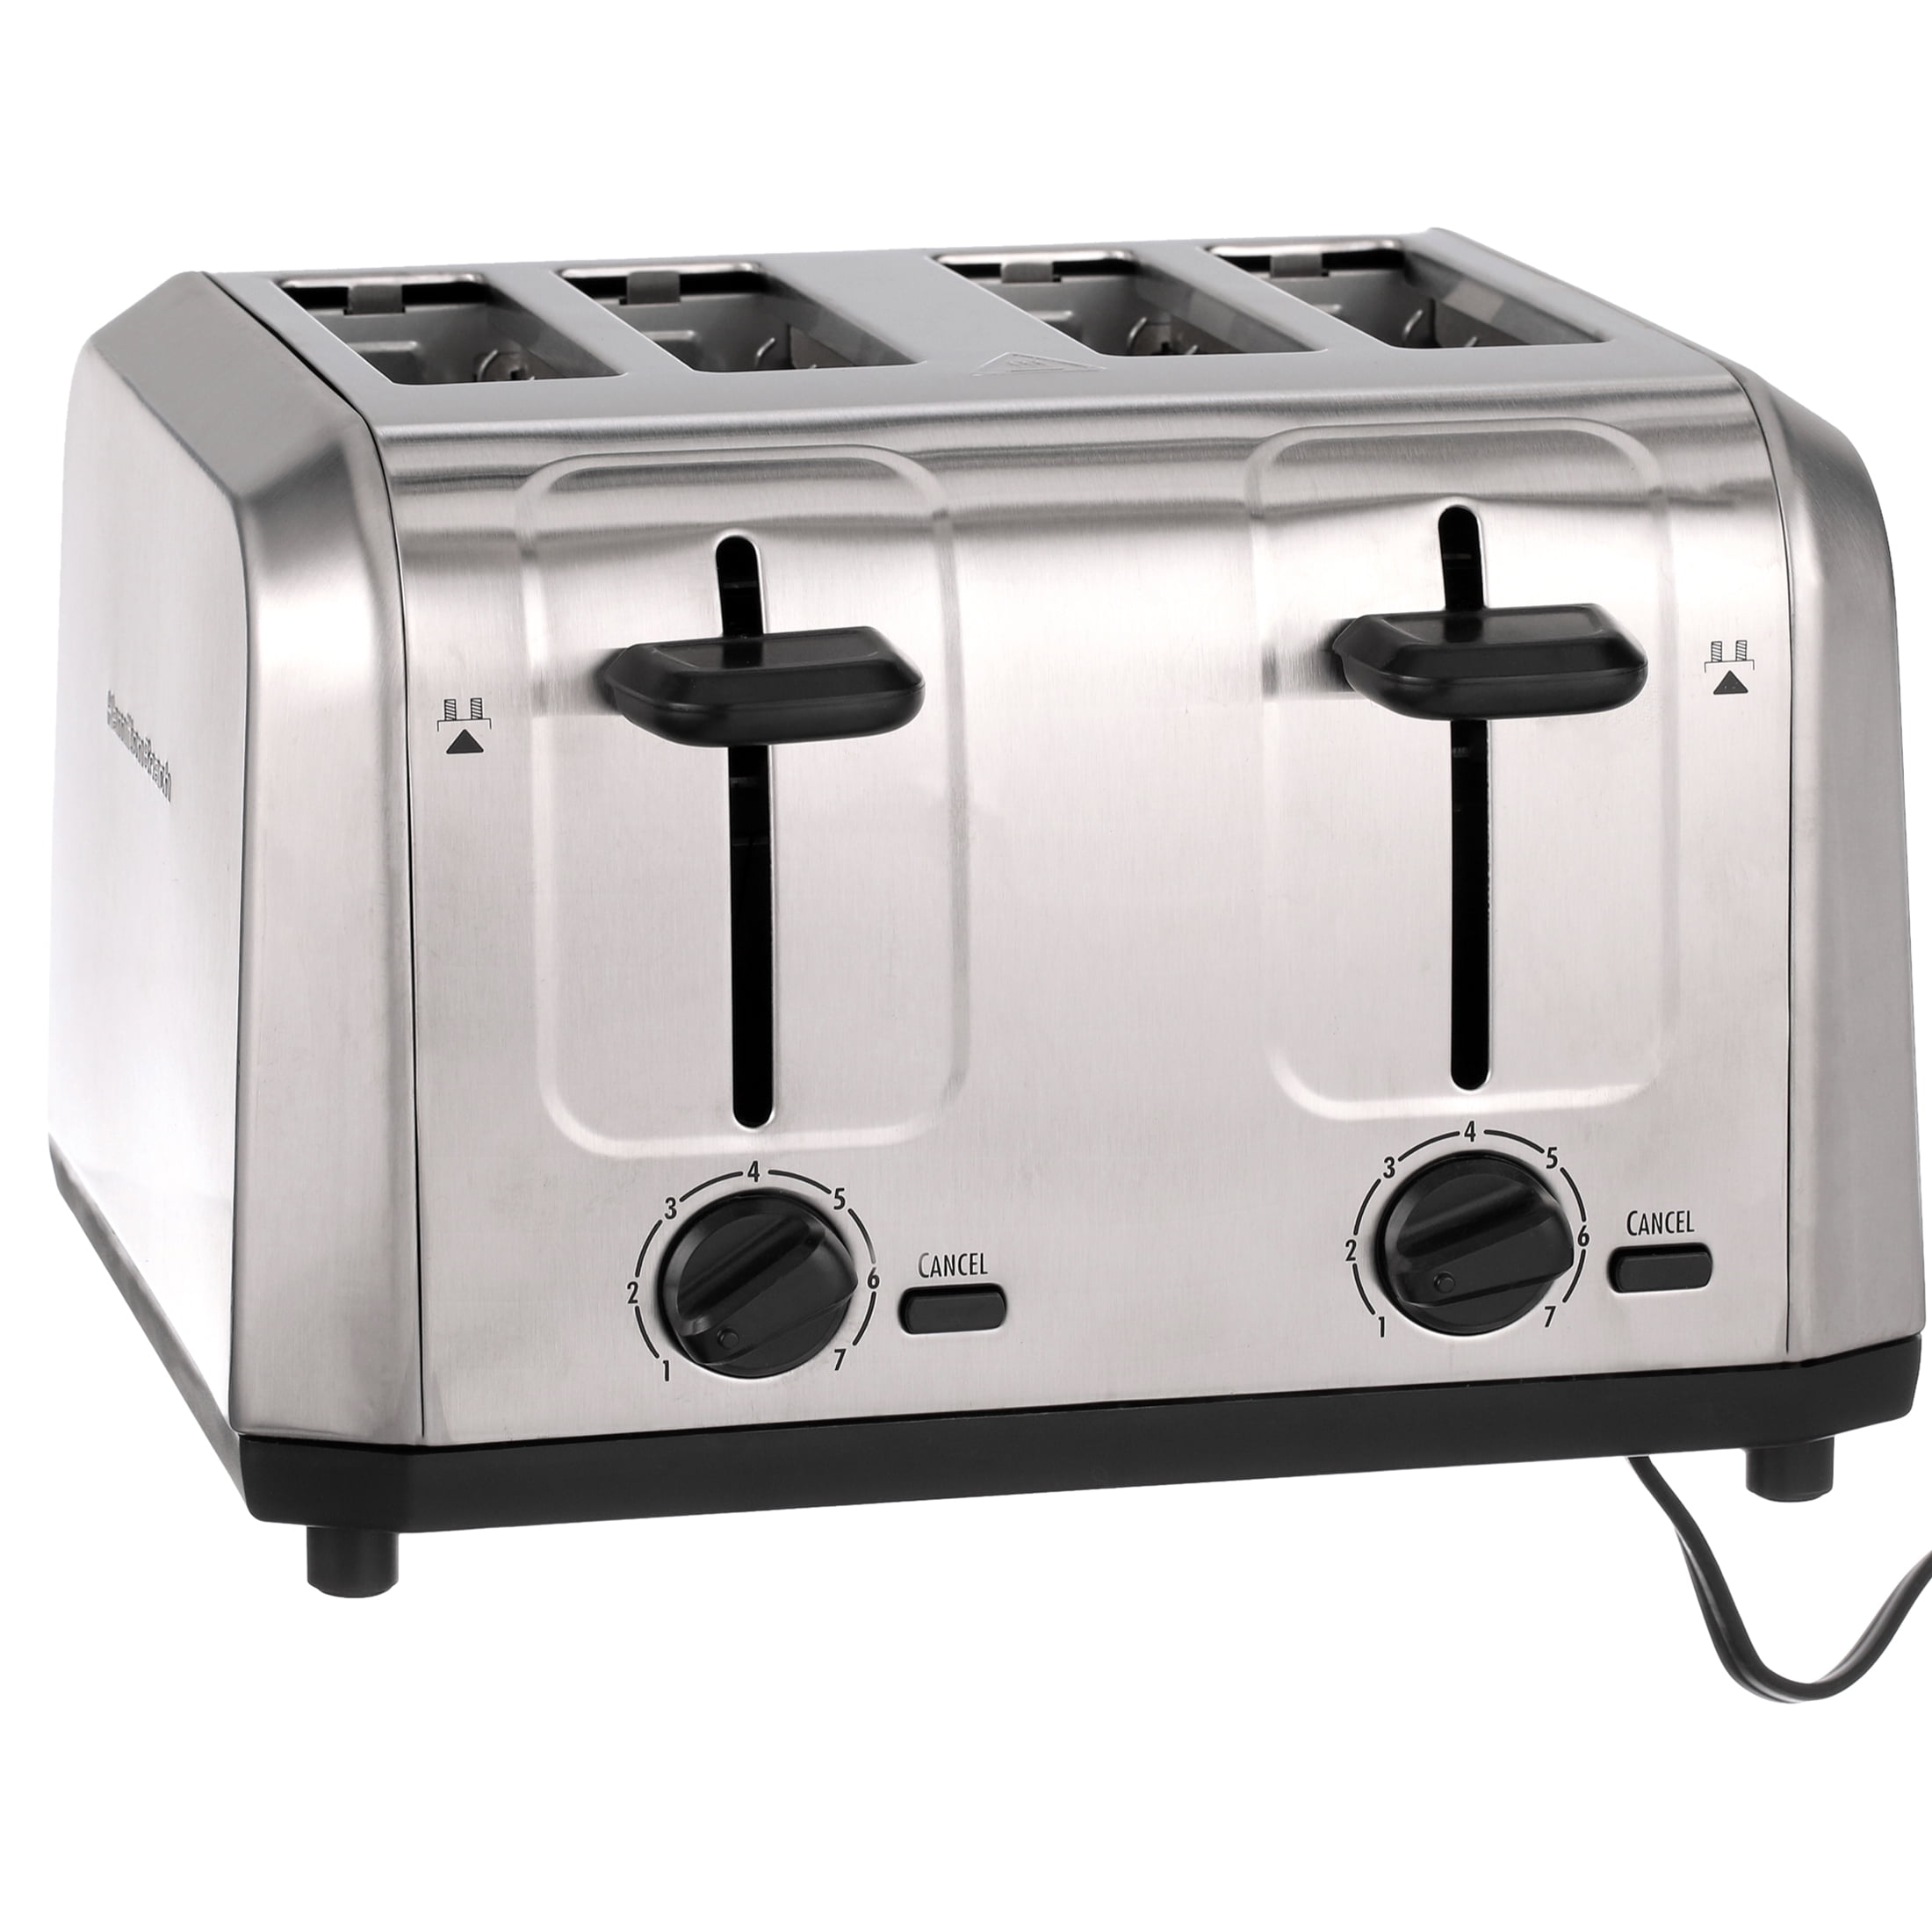 Hamilton Beach 4-Slice Stainless Steel Wide Slot Toaster 24910 - The Home  Depot